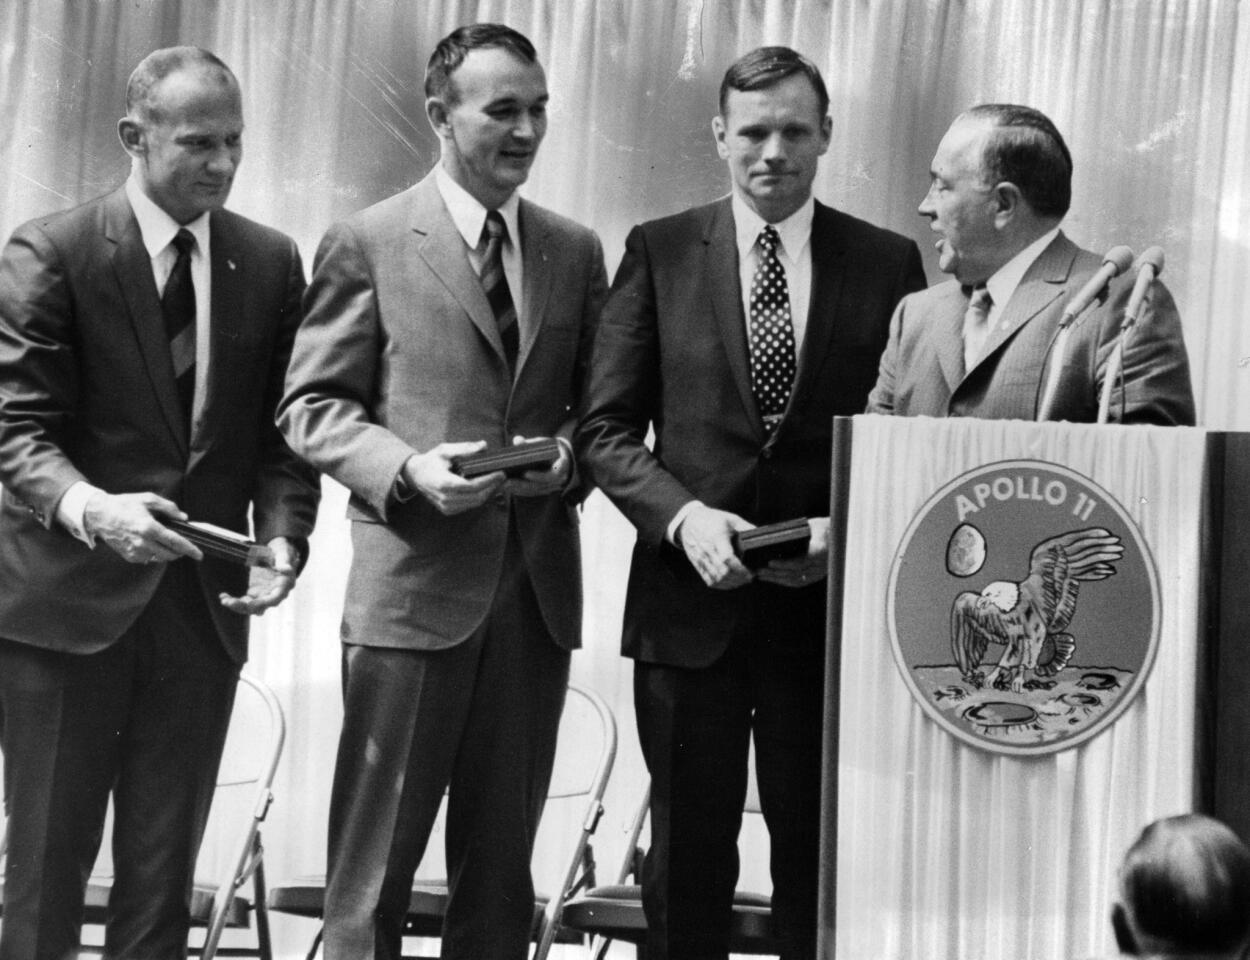 Chicago Mayor Richard J. Daley presents medals to Apollo 11 astronauts Edwin "Buzz" Aldrin, from left, Michael Collins and Neil Armstrong on Aug. 13, 1969, outside the Civic Center. The crowd, estimated at 100,000 people, jammed the Civic Center Plaza to watch the ceremonies honoring the "Moon Men" with medals, making them honorary citizens of Chicago.